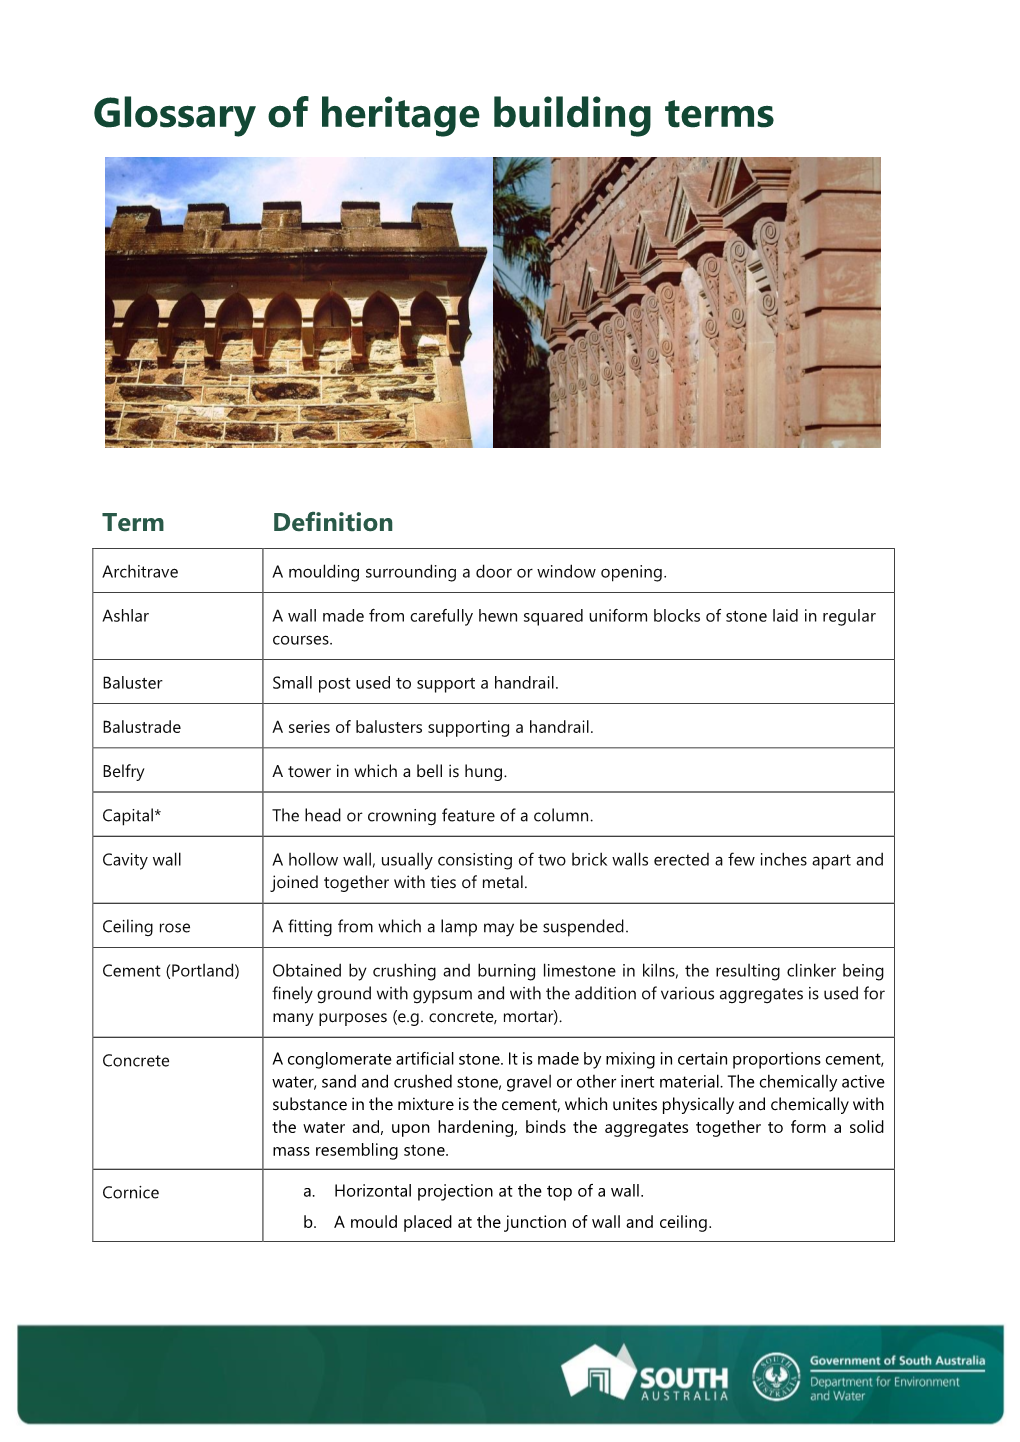 Glossary of Heritage Building Terms